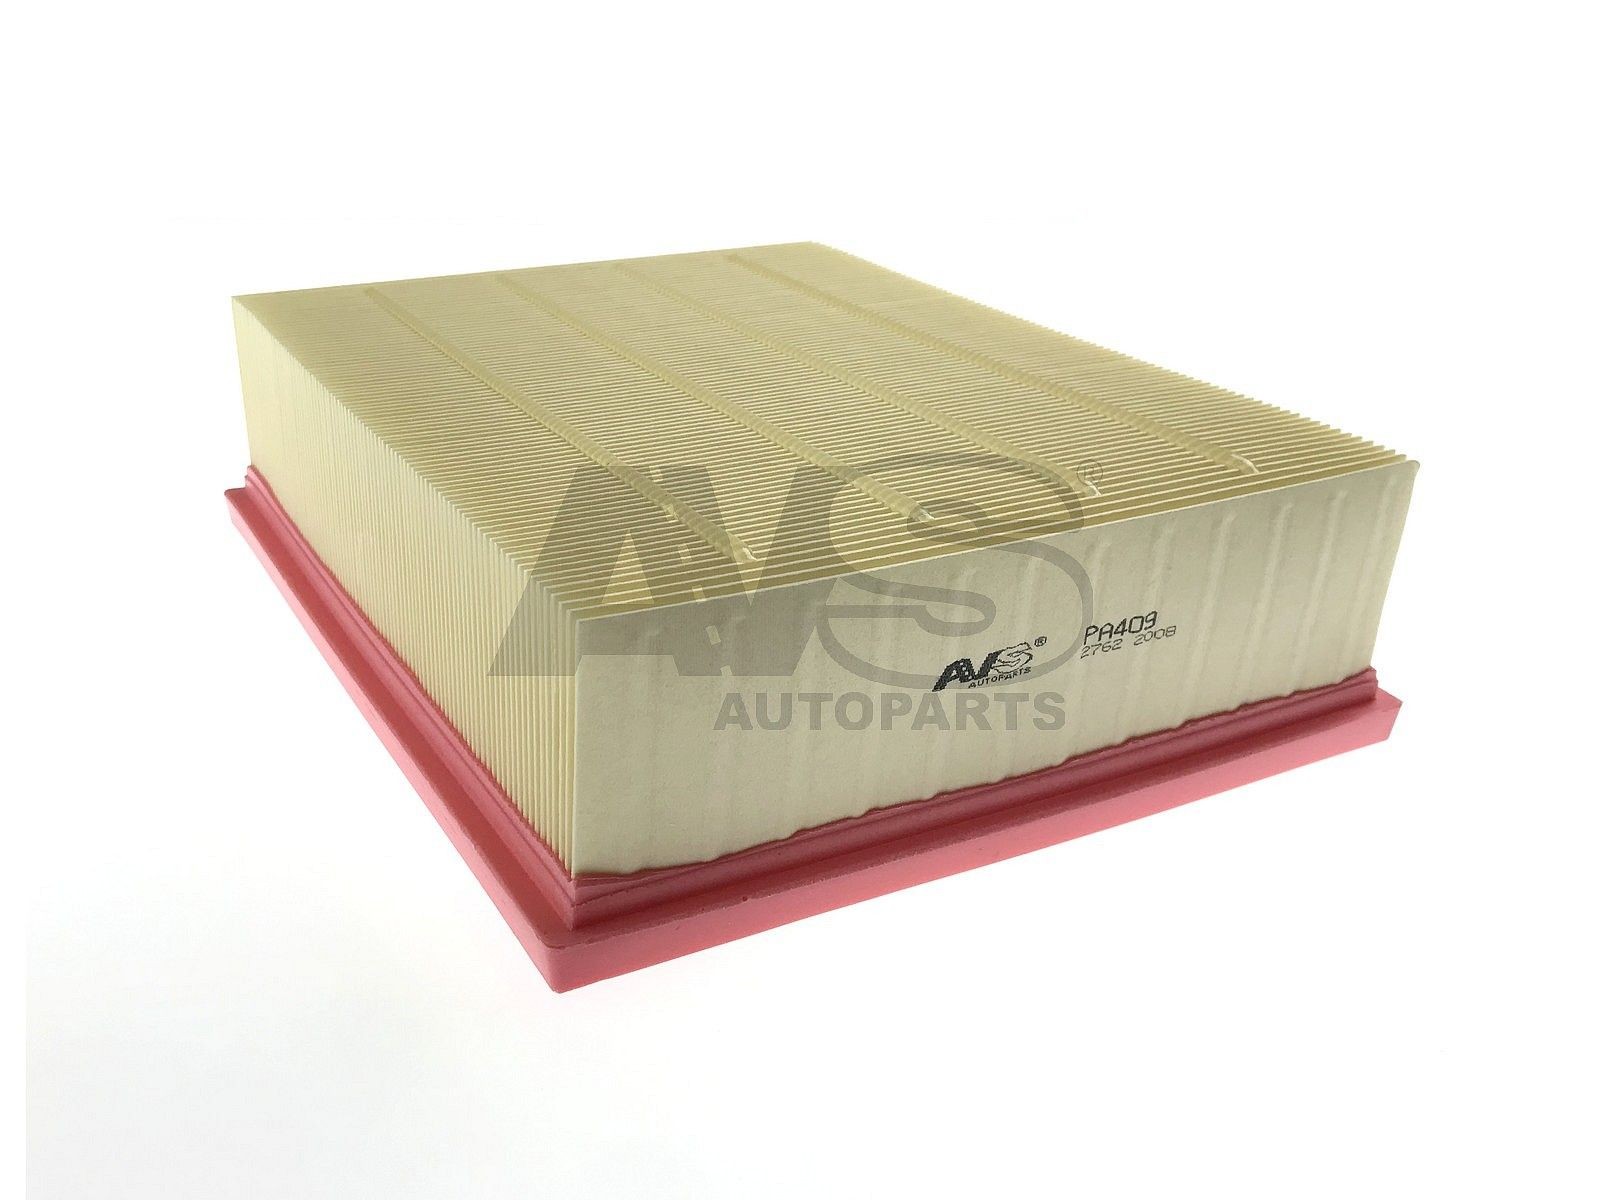 AVS AUTOPARTS Engine air filters diesel and petrol A4 B7 Convertible (8HE) new PA409